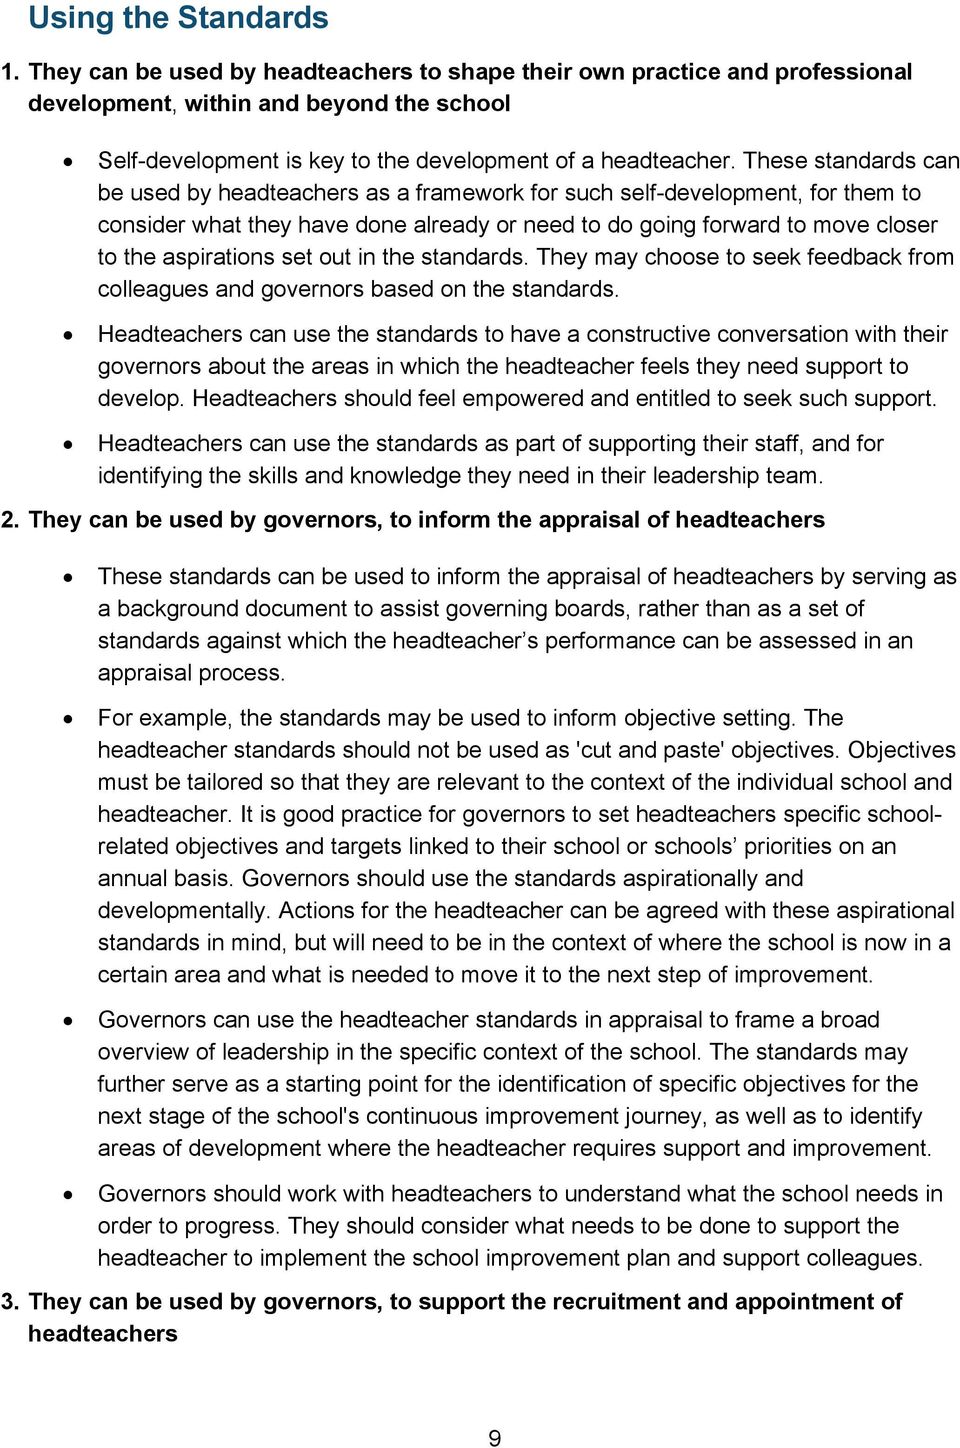 These standards can be used by headteachers as a framework for such self-development, for them to consider what they have done already or need to do going forward to move closer to the aspirations